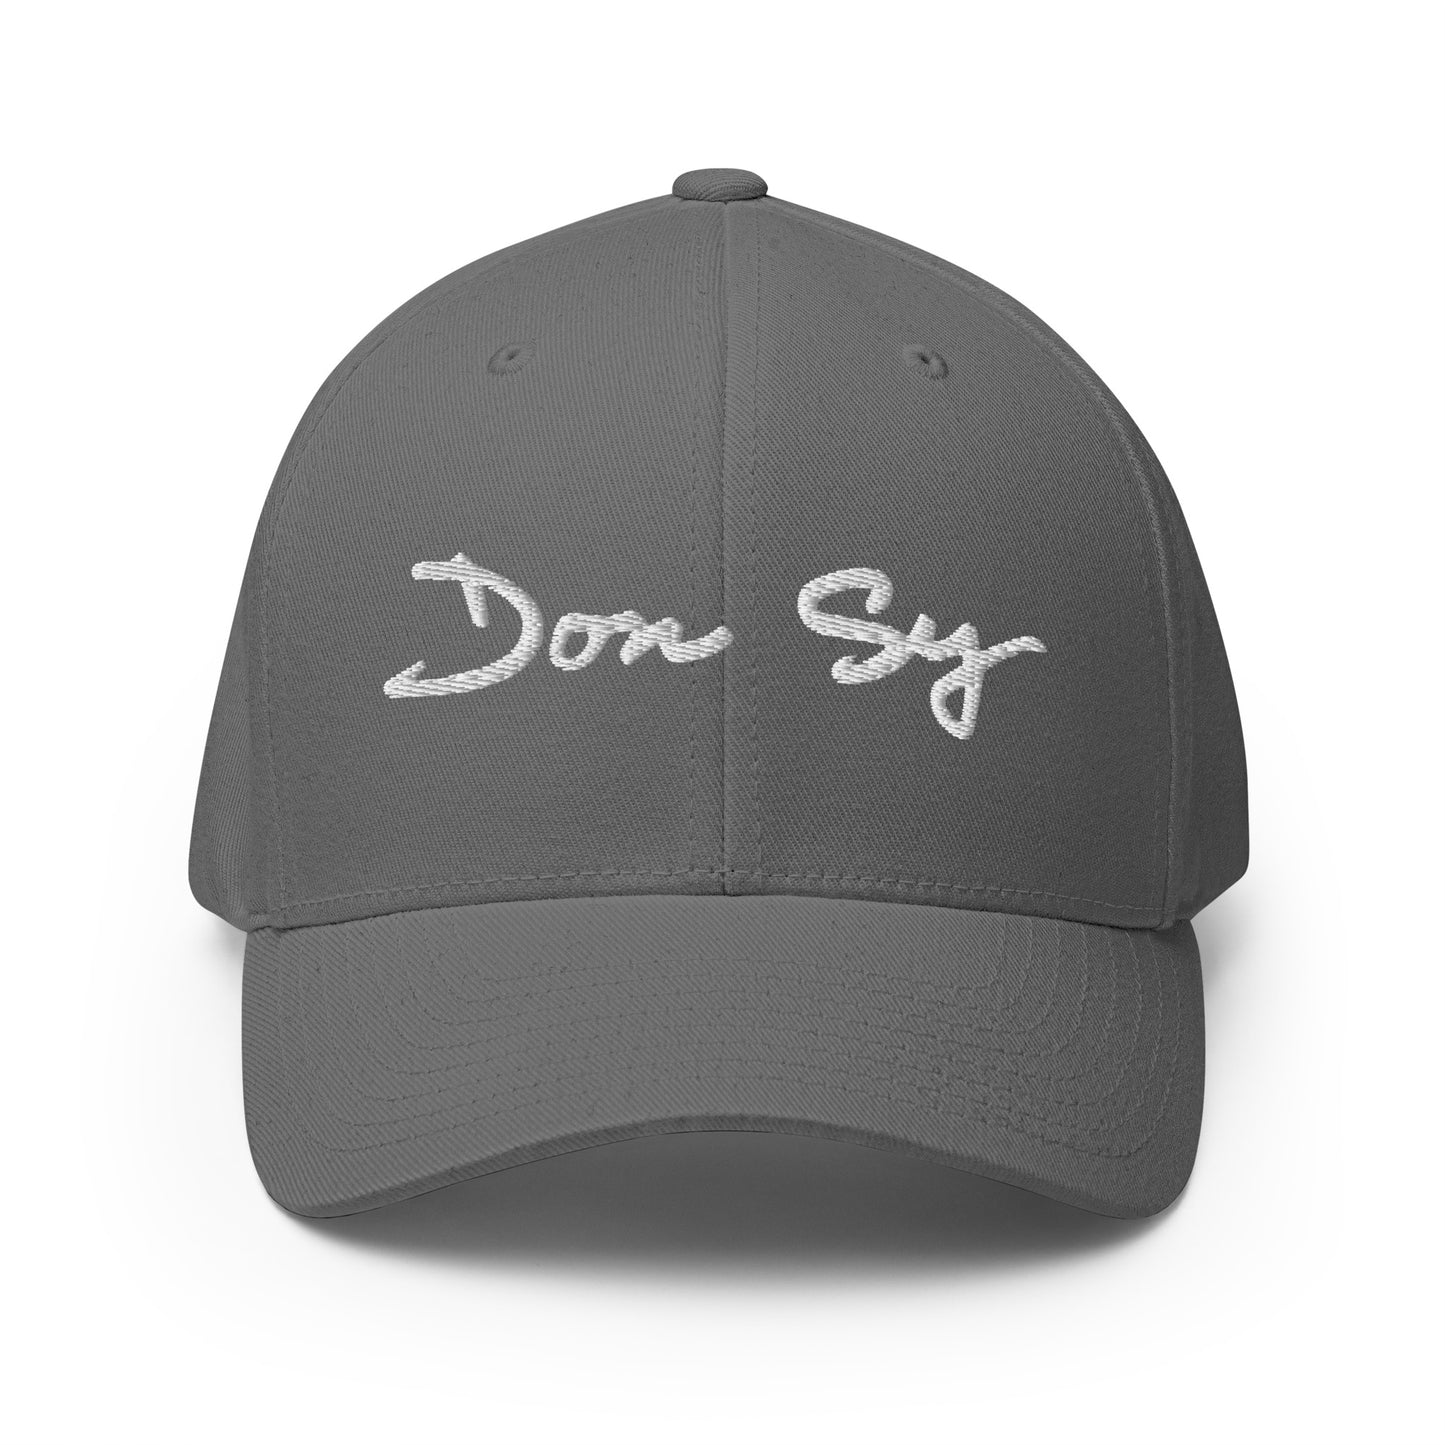 Don Sy Signature Structured Twill Cap